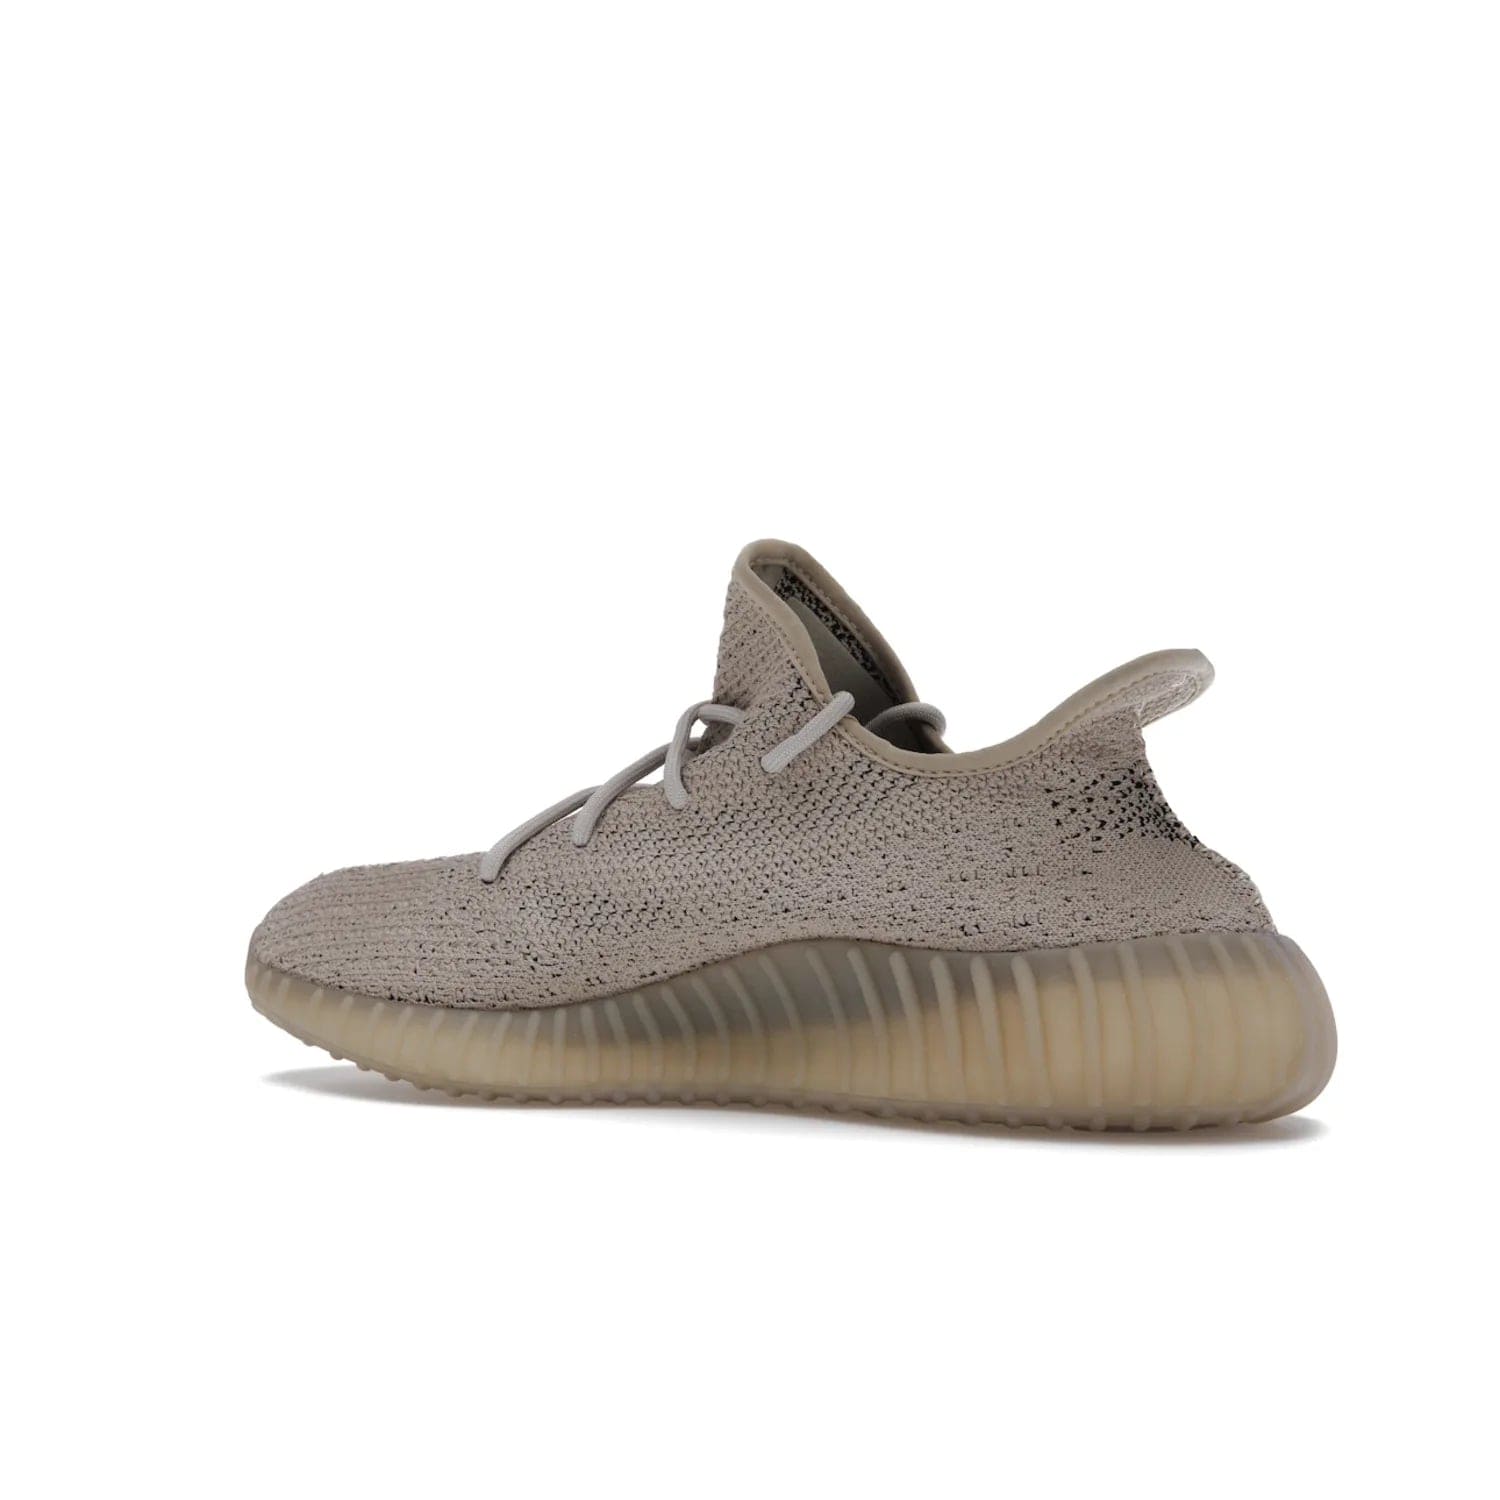 adidas Yeezy Boost 350 V2 Slate - Image 22 - Only at www.BallersClubKickz.com - Adidas Yeezy Boost 350 V2 Slate Core Black Slate featuring Primeknit upper, Boost midsole and semi-translucent TPU cage. Launched on 3/9/2022, retailed at $230.